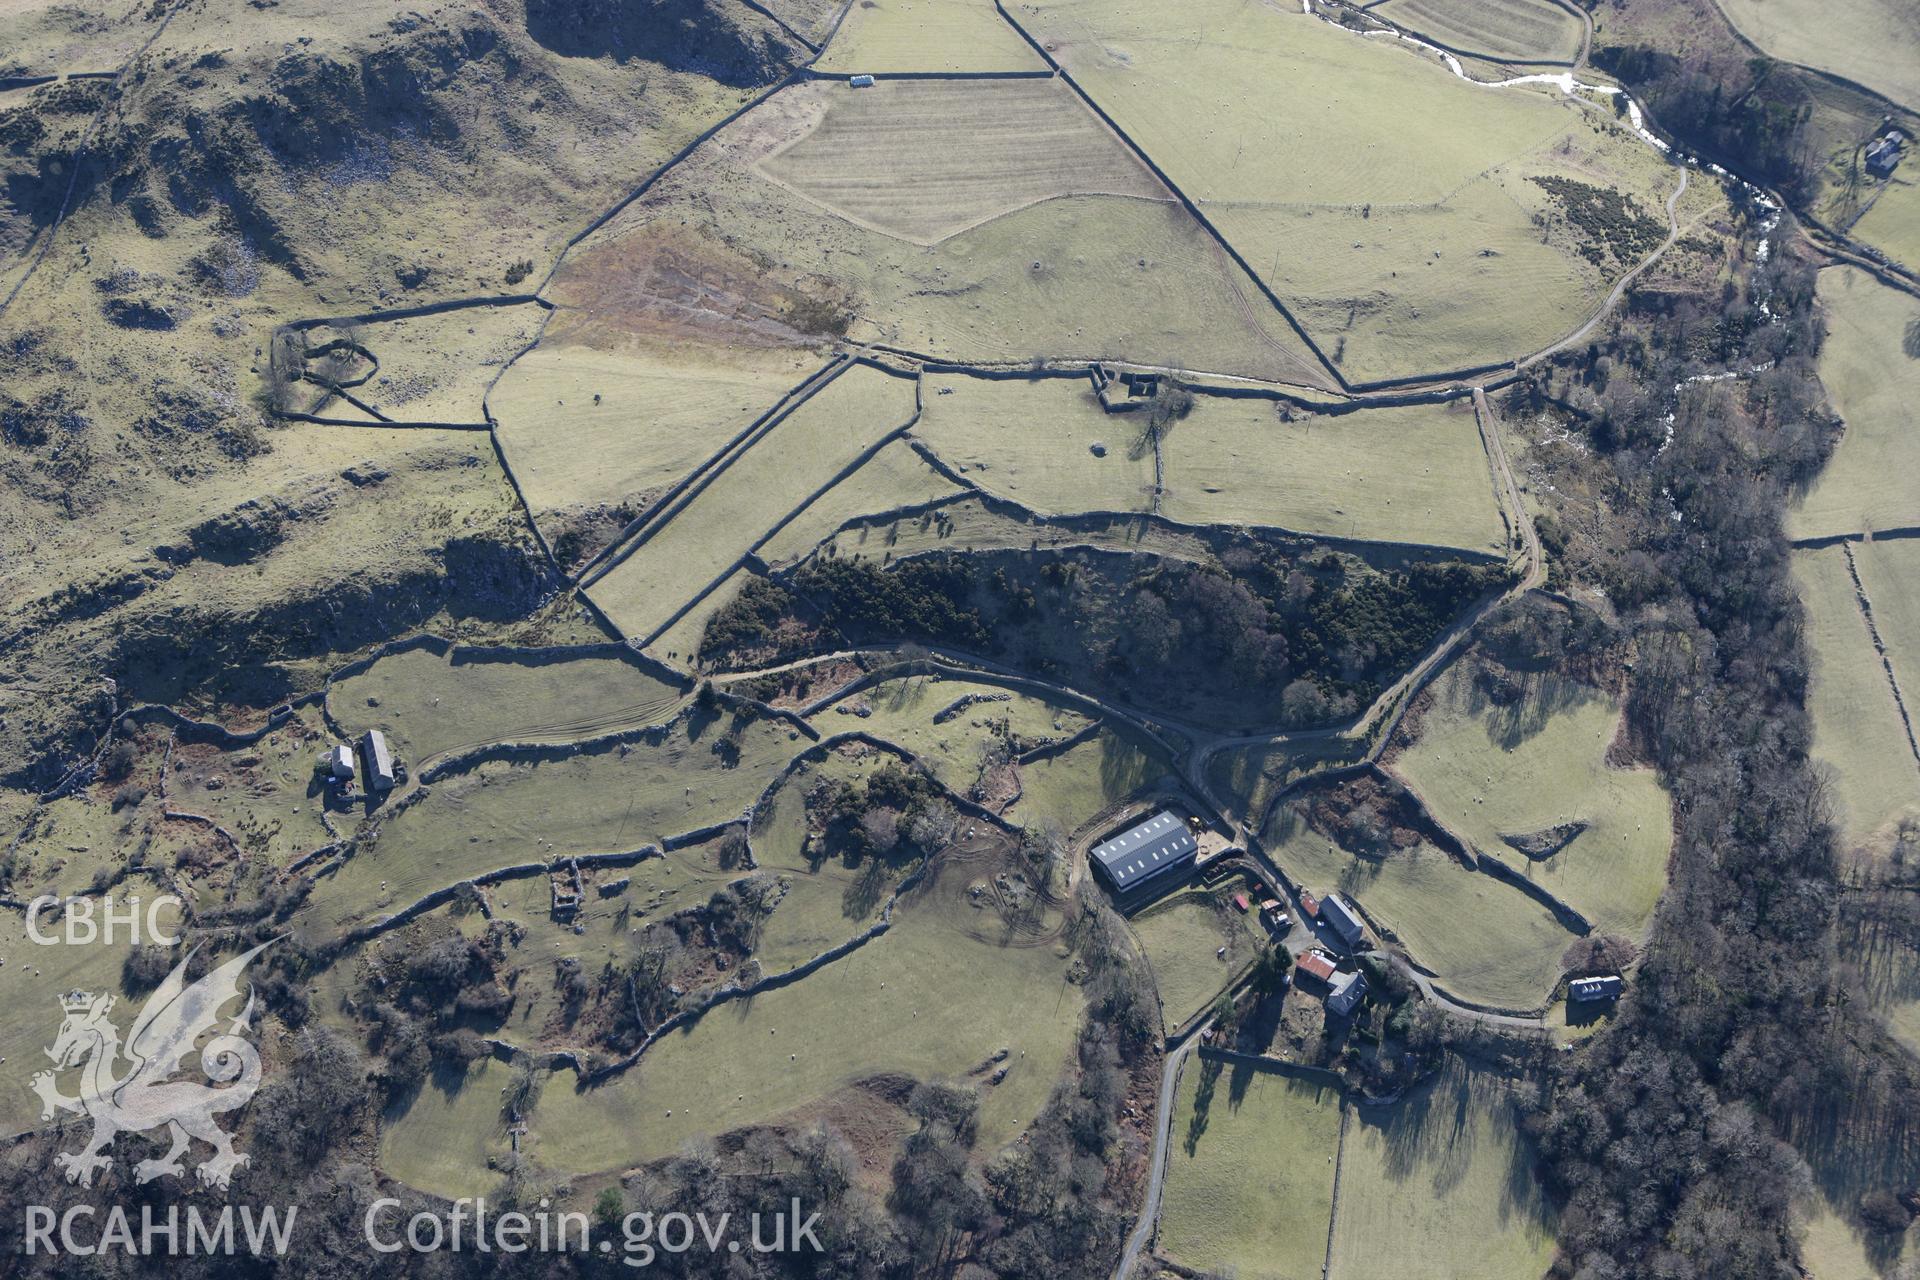 RCAHMW colour oblique photograph of Bwlch Gilbert and outlying farms. Taken by Toby Driver on 08/03/2010.